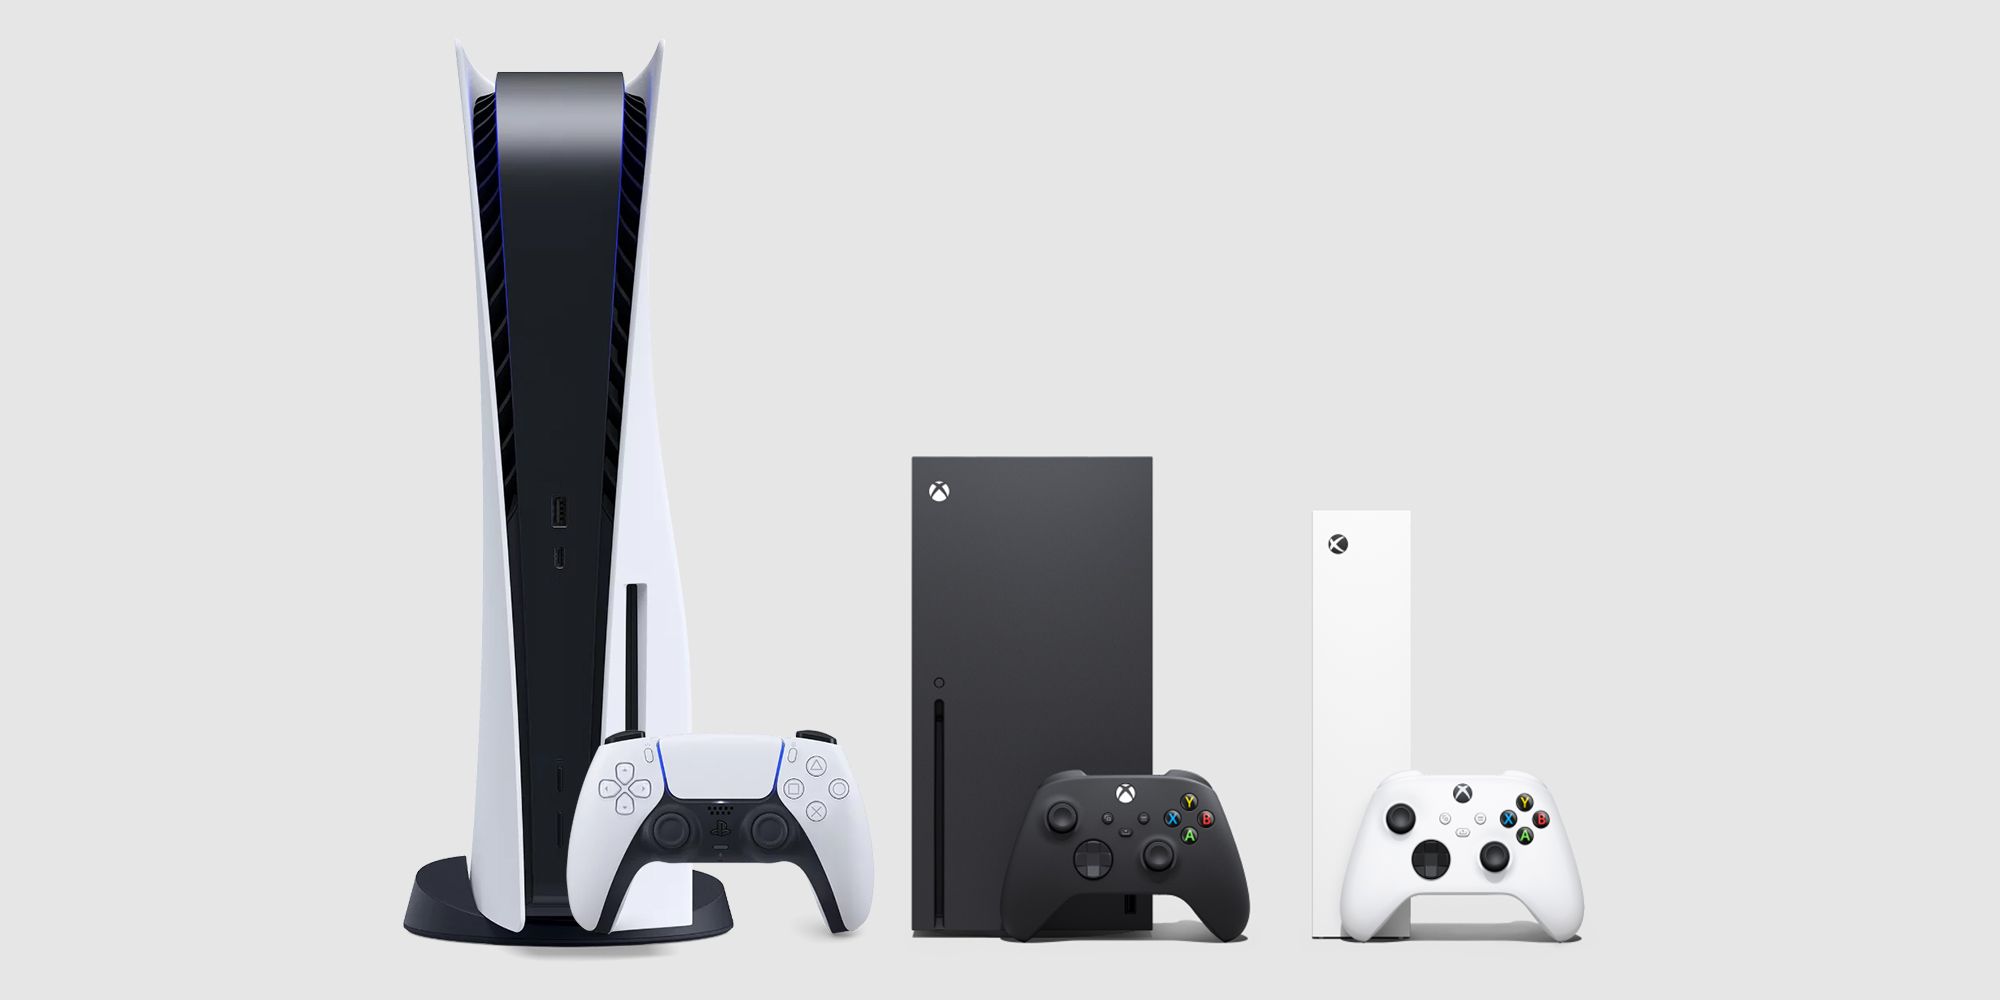 Microsoft Exec Says Xbox Lost Console War to Sony, Nintendo - Men's Journal